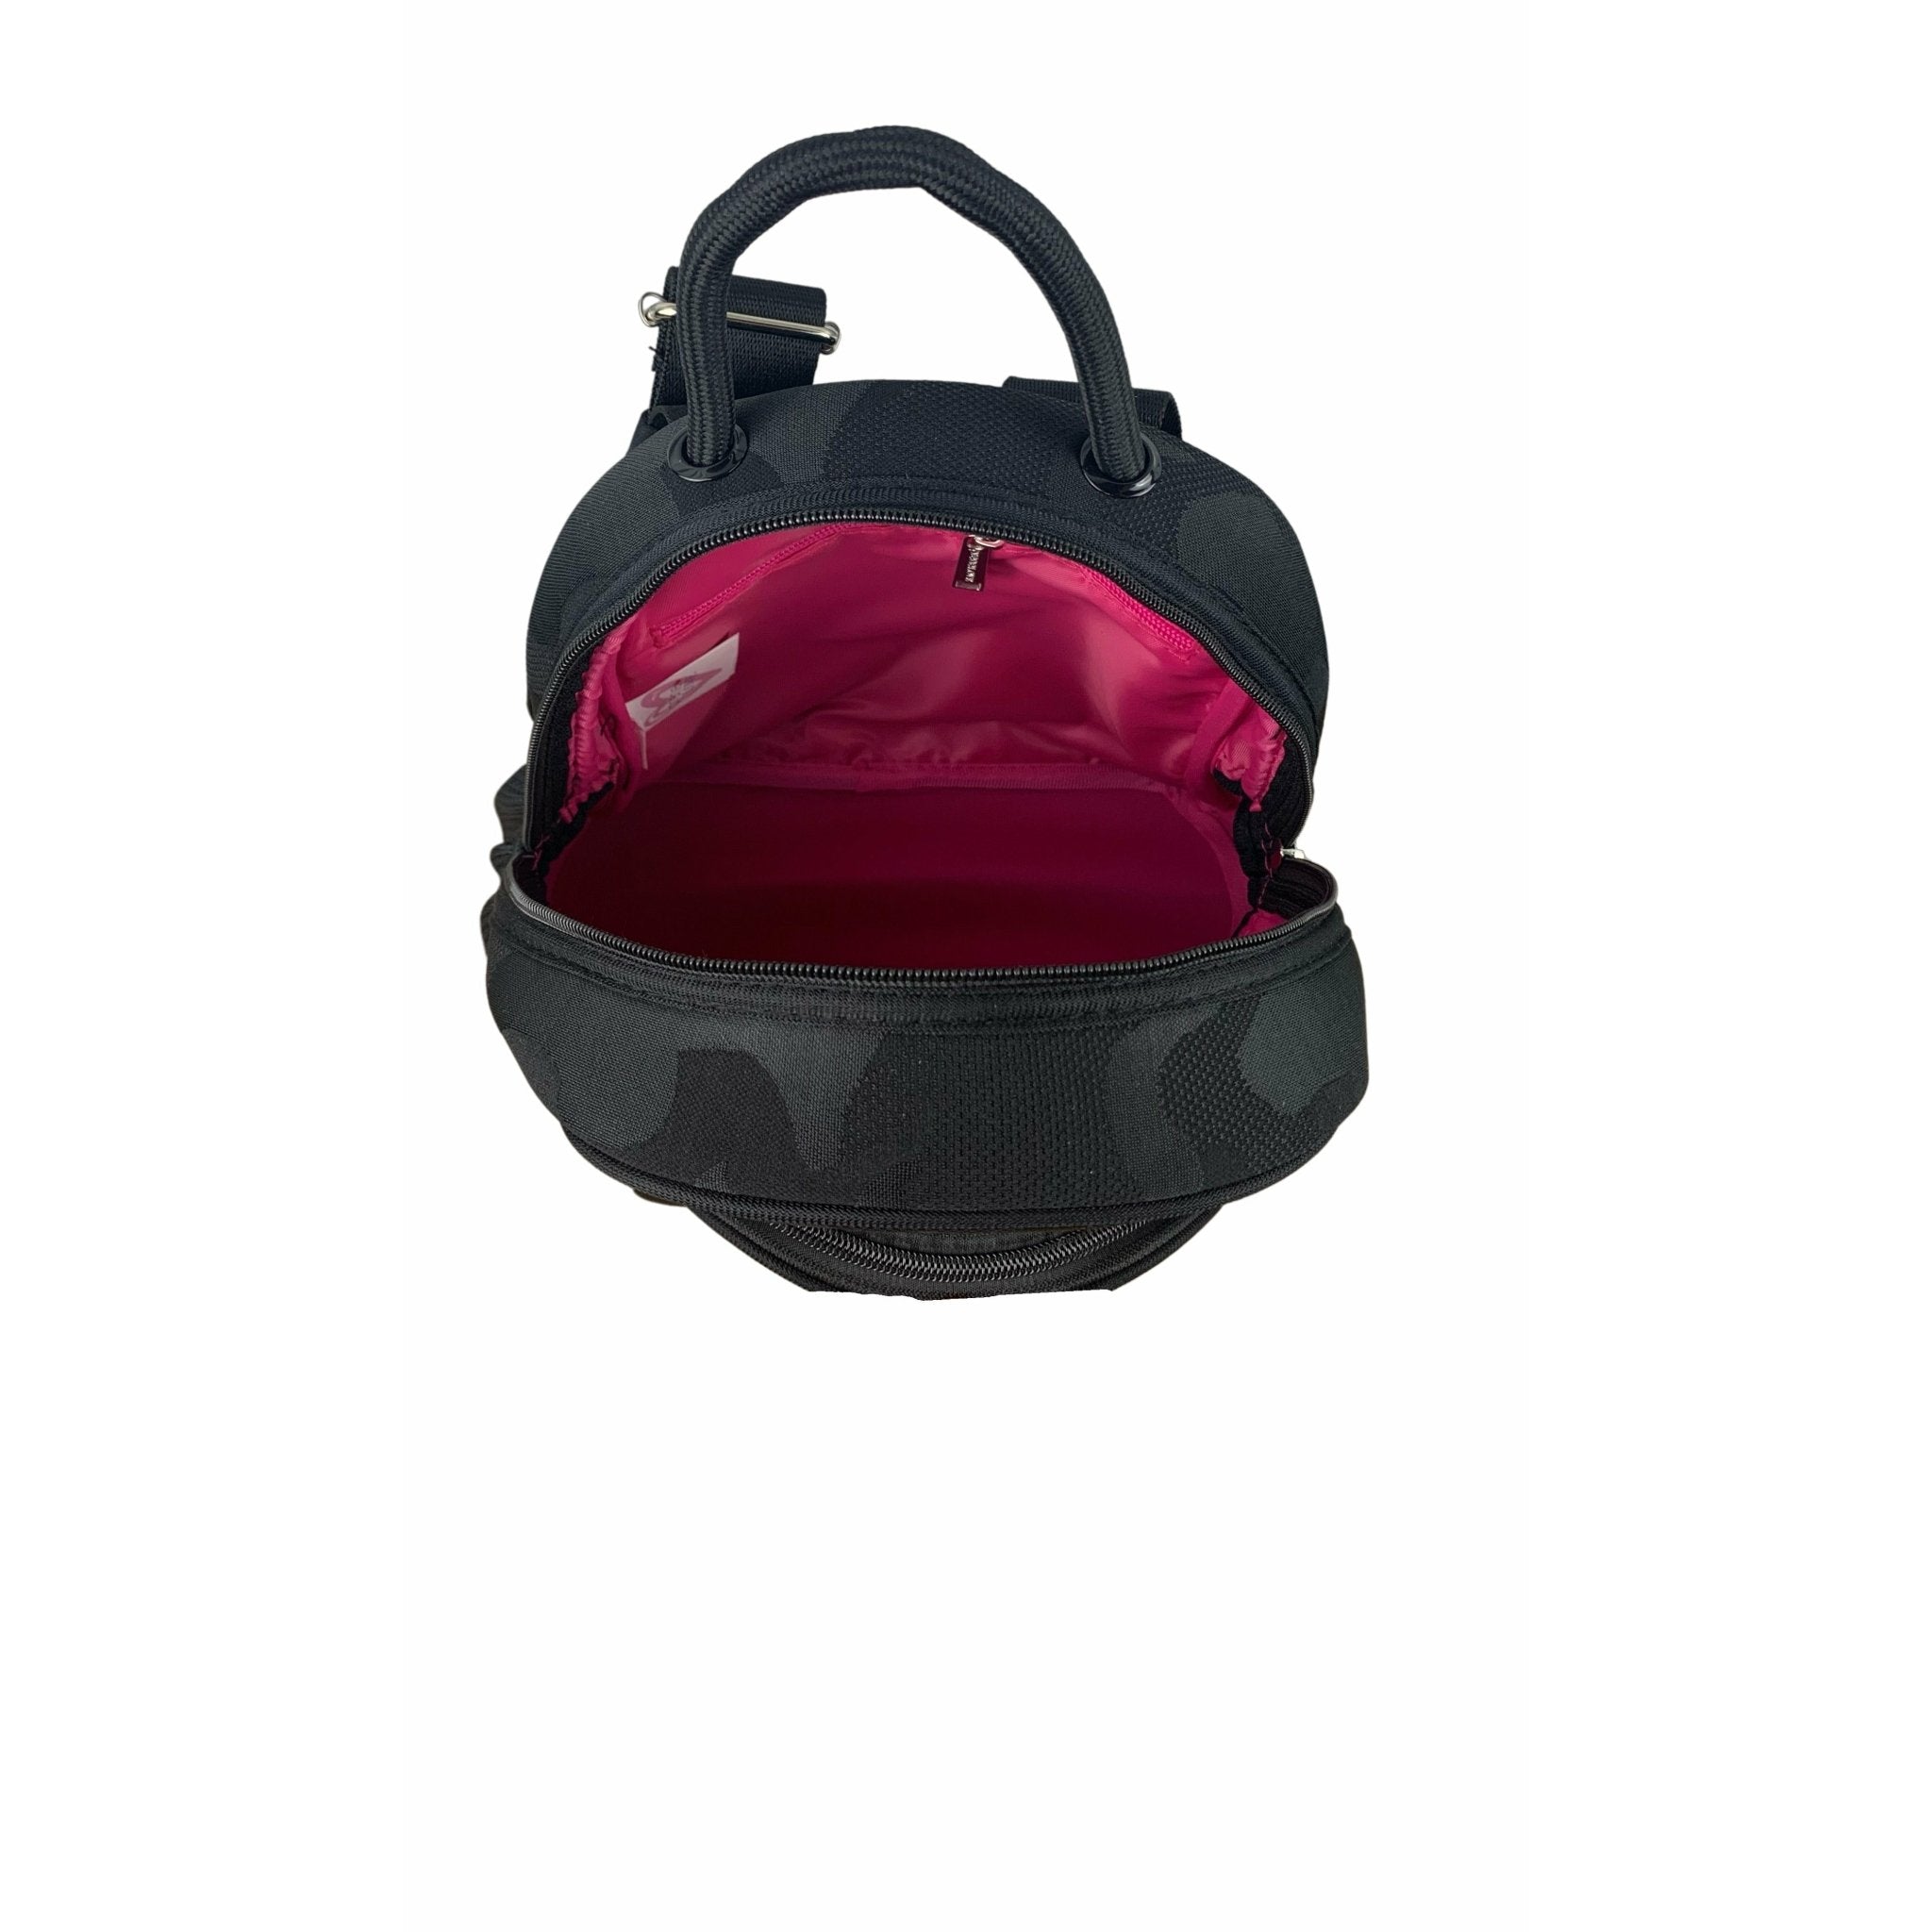 Revelstoke Backpack with Raspberry Pink Interior